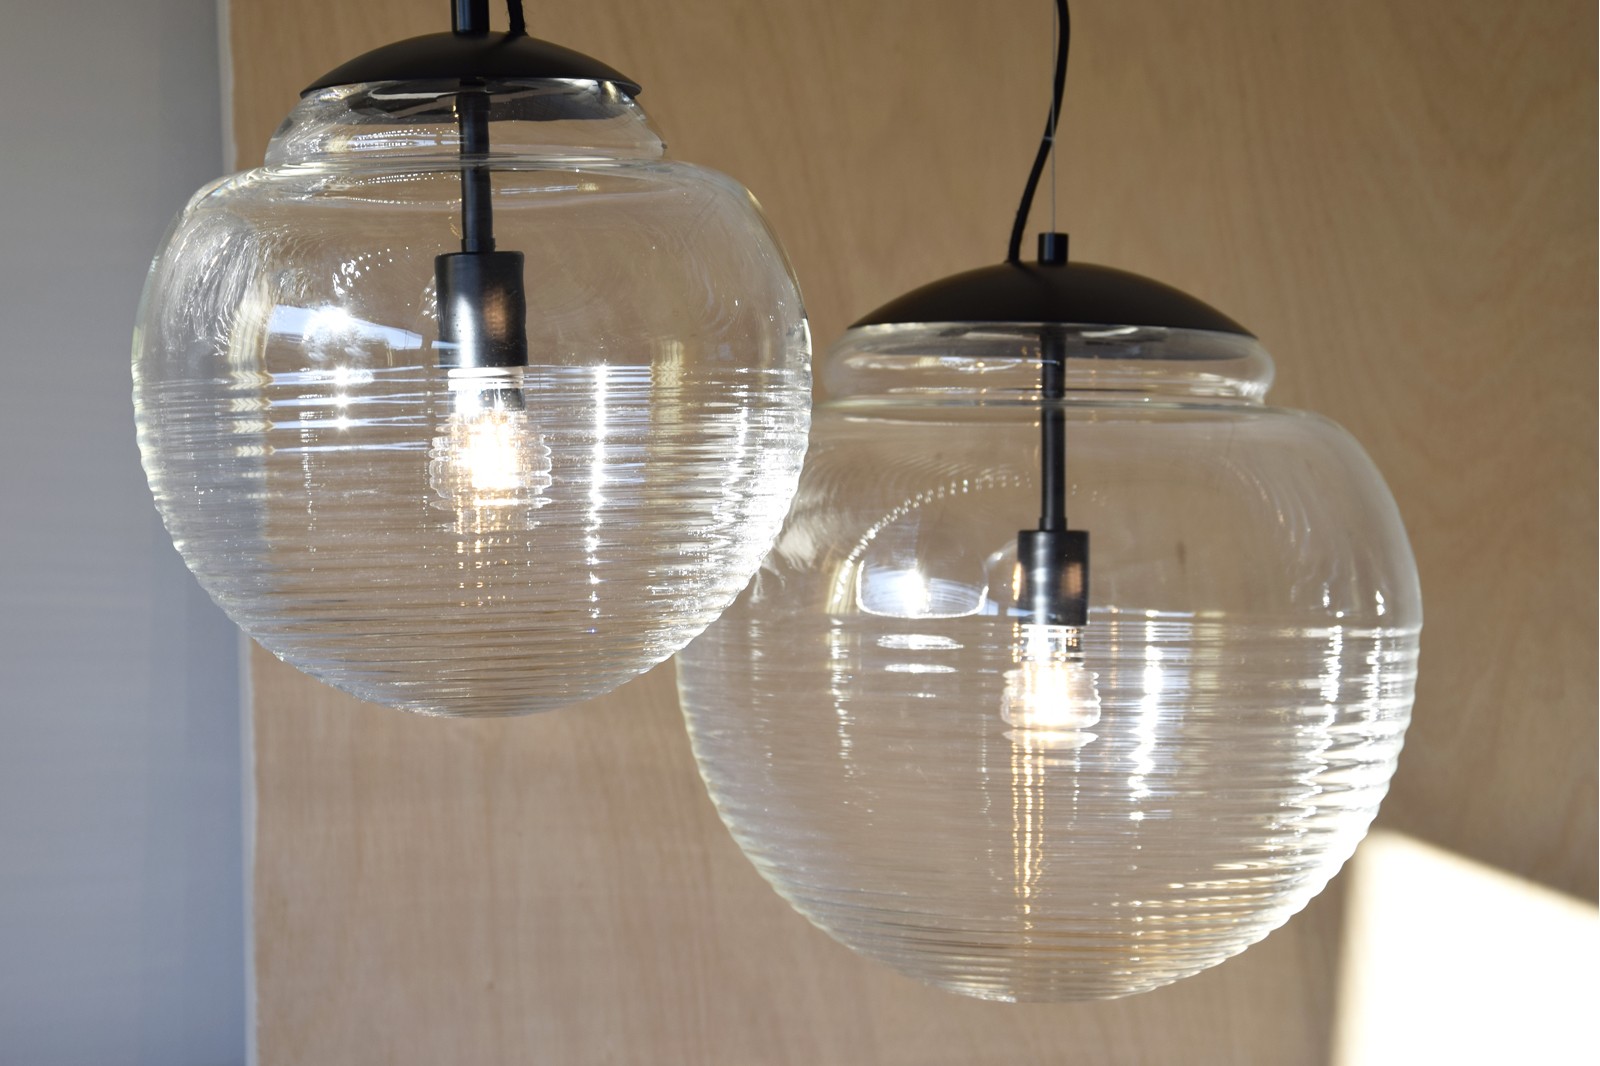 ARNELA COLLECTION: CEILING LAMPS. GLASS AND BLACK METAL